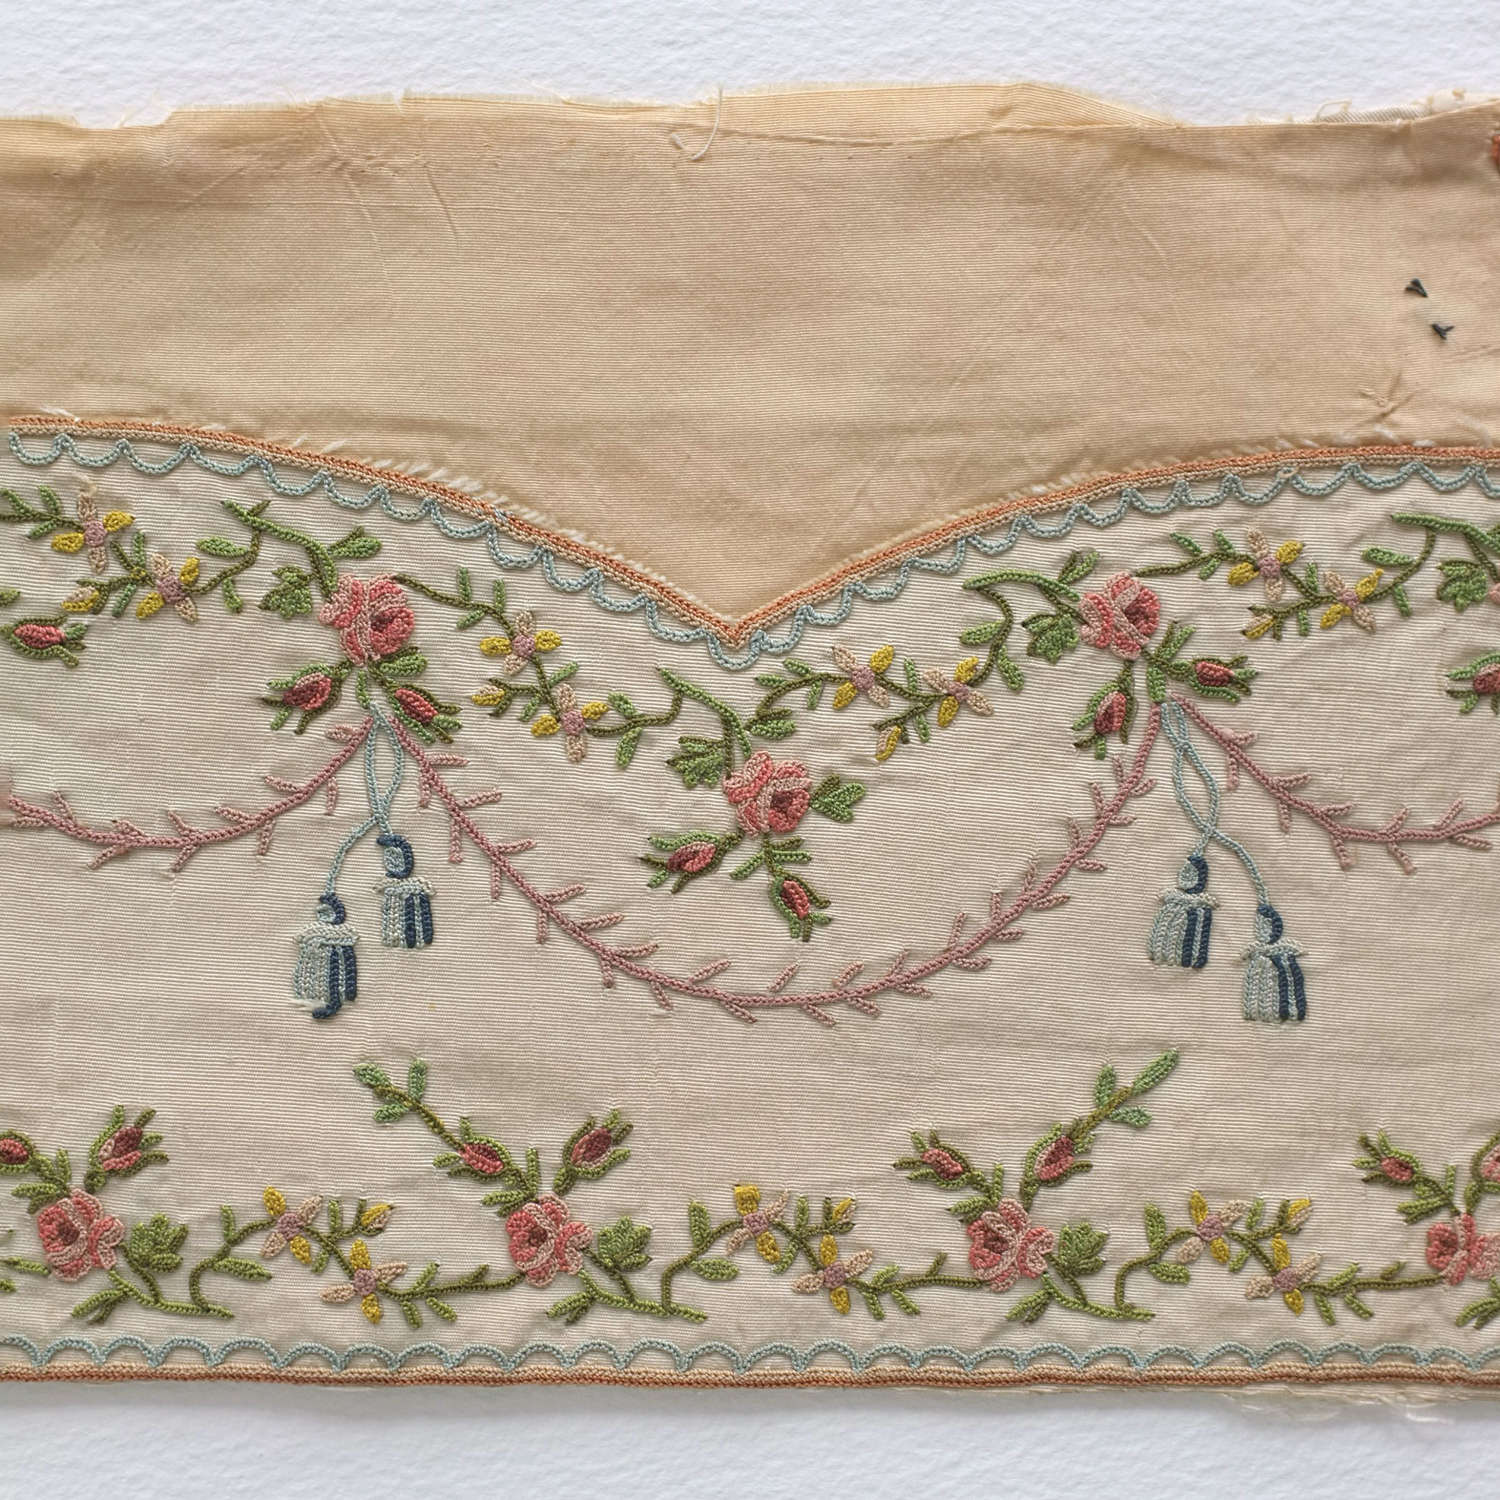 Antique 18th Century Silk Embroidered Waistcoat Fragment